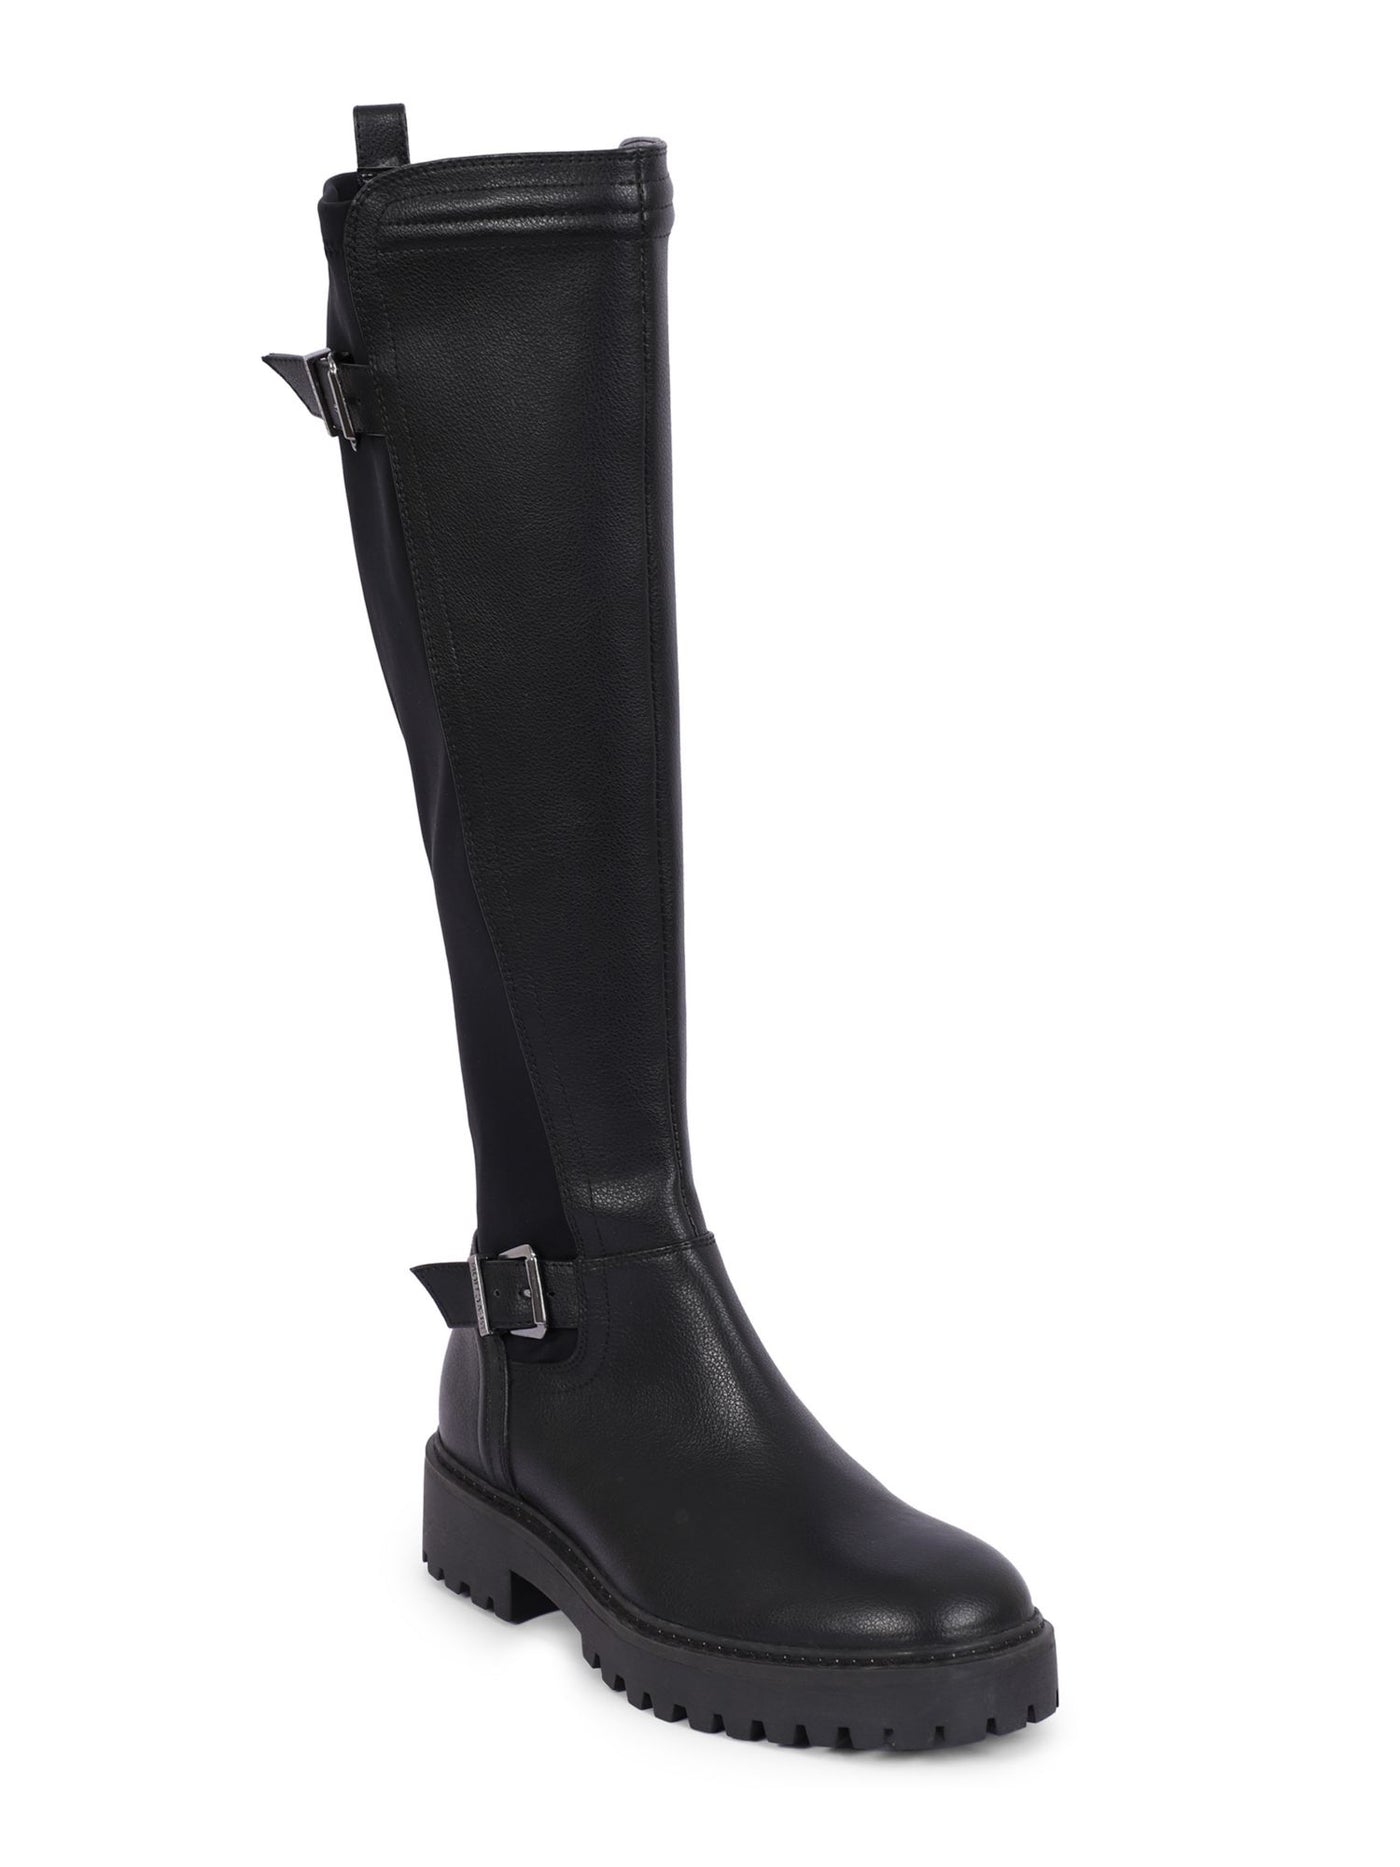 REACTION KENNETH COLE Womens Black Buckle Accent Stretch Salt Round Toe Block Heel Zip-Up Riding Boot 9